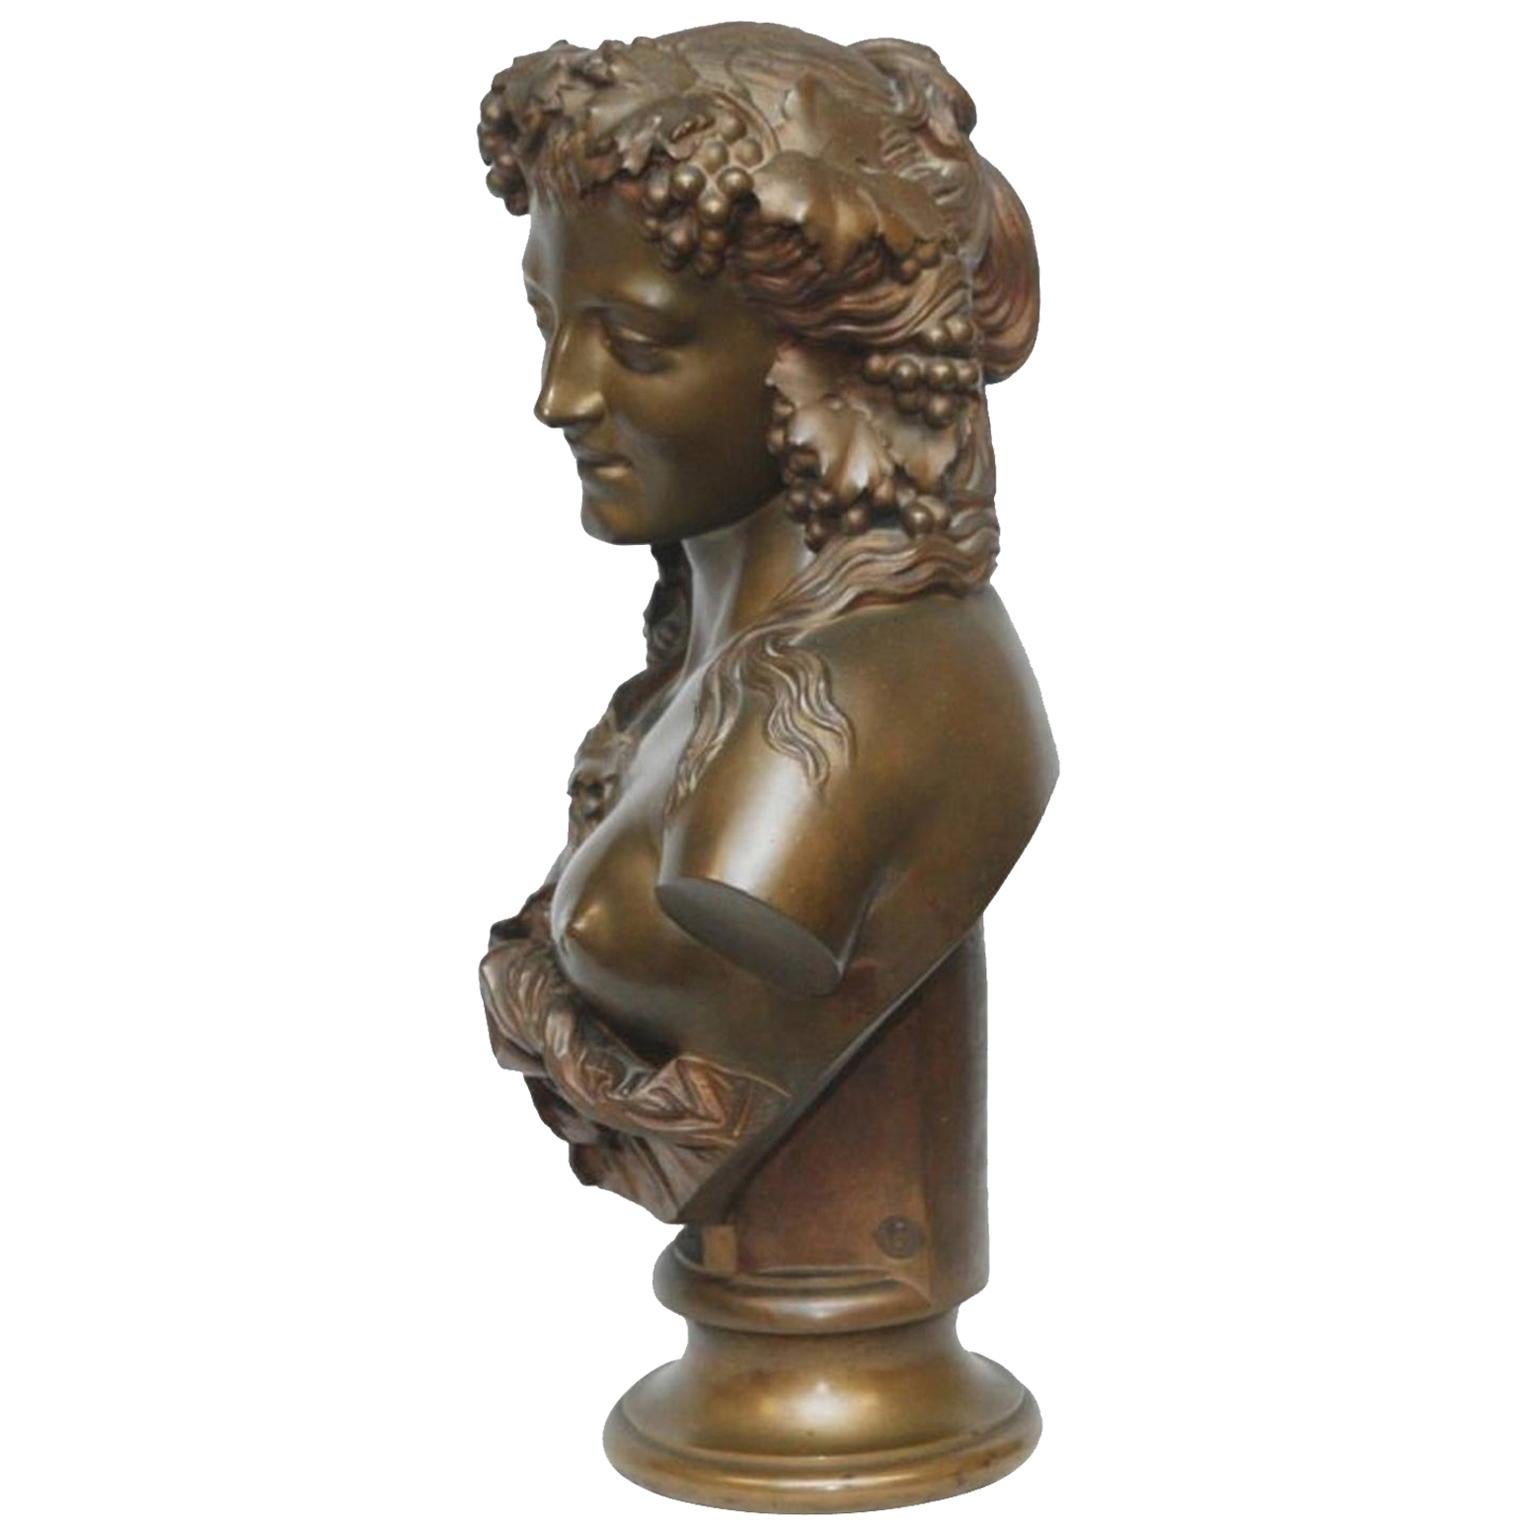 A large bronze bust showing a beautiful young woman depicted as a Bacchante, the Greek Goddess of Wine, her head festooned with grape branches. The bust is supported by an integral bronze plinth that at the back is inscribed with the name of the